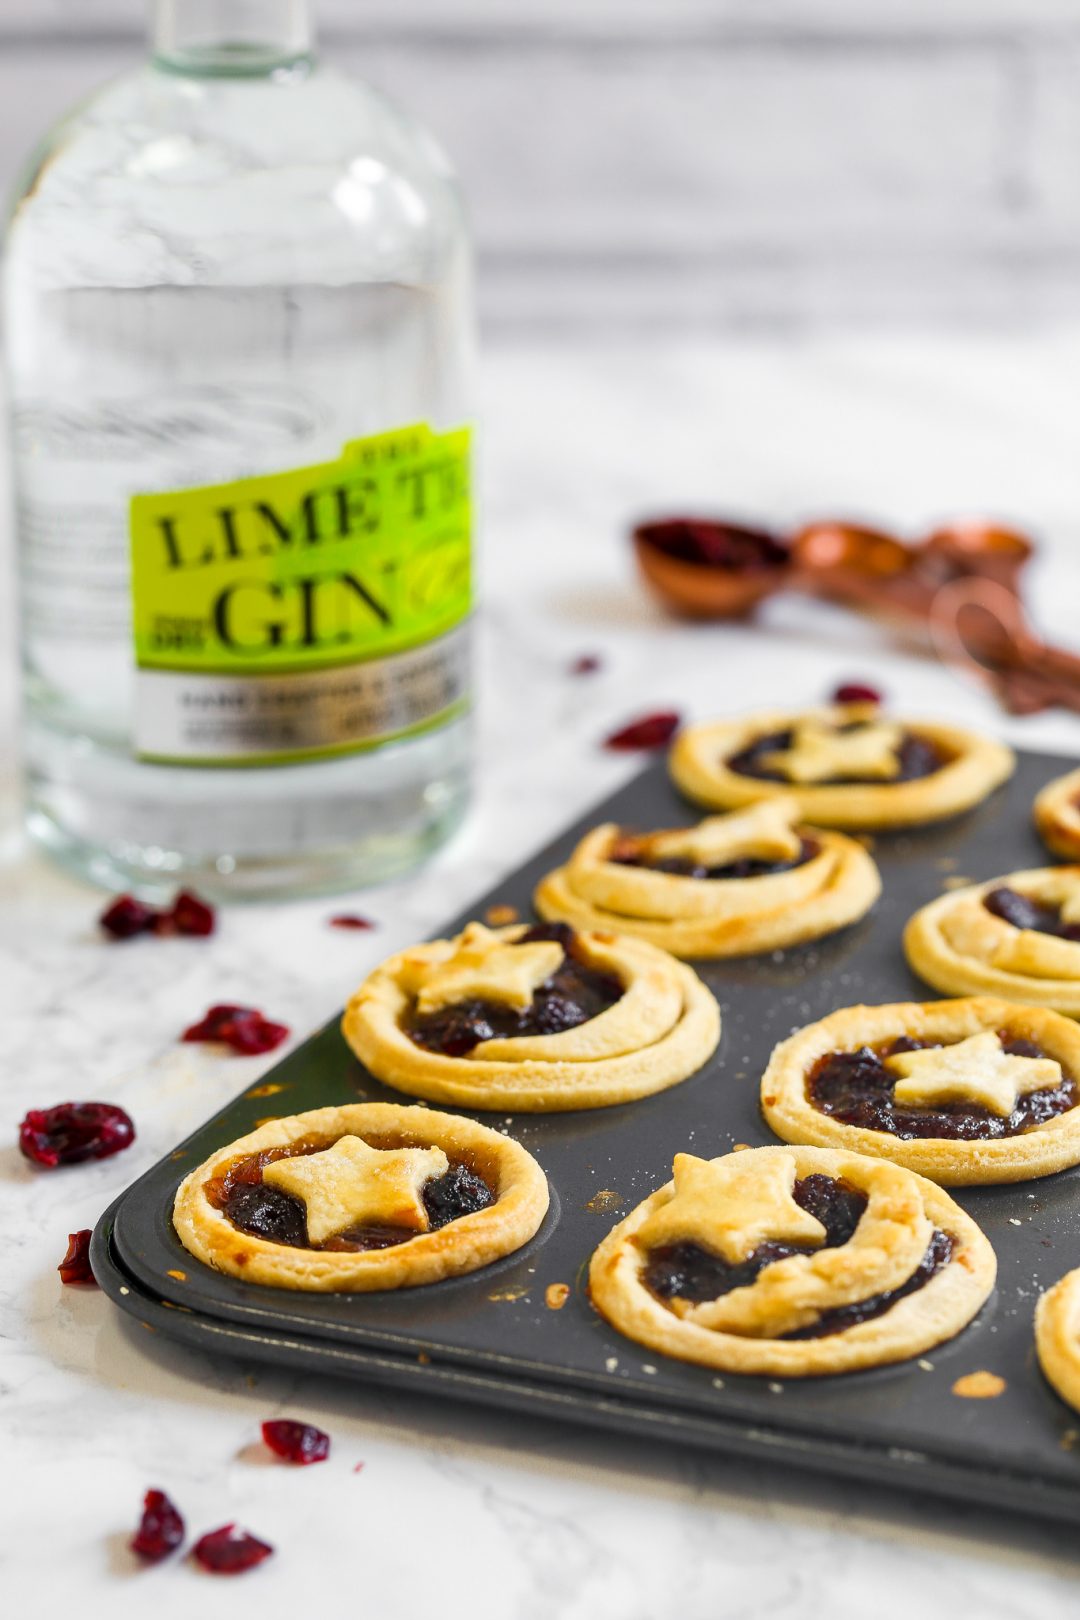 Lime gin and cranberry mince pies